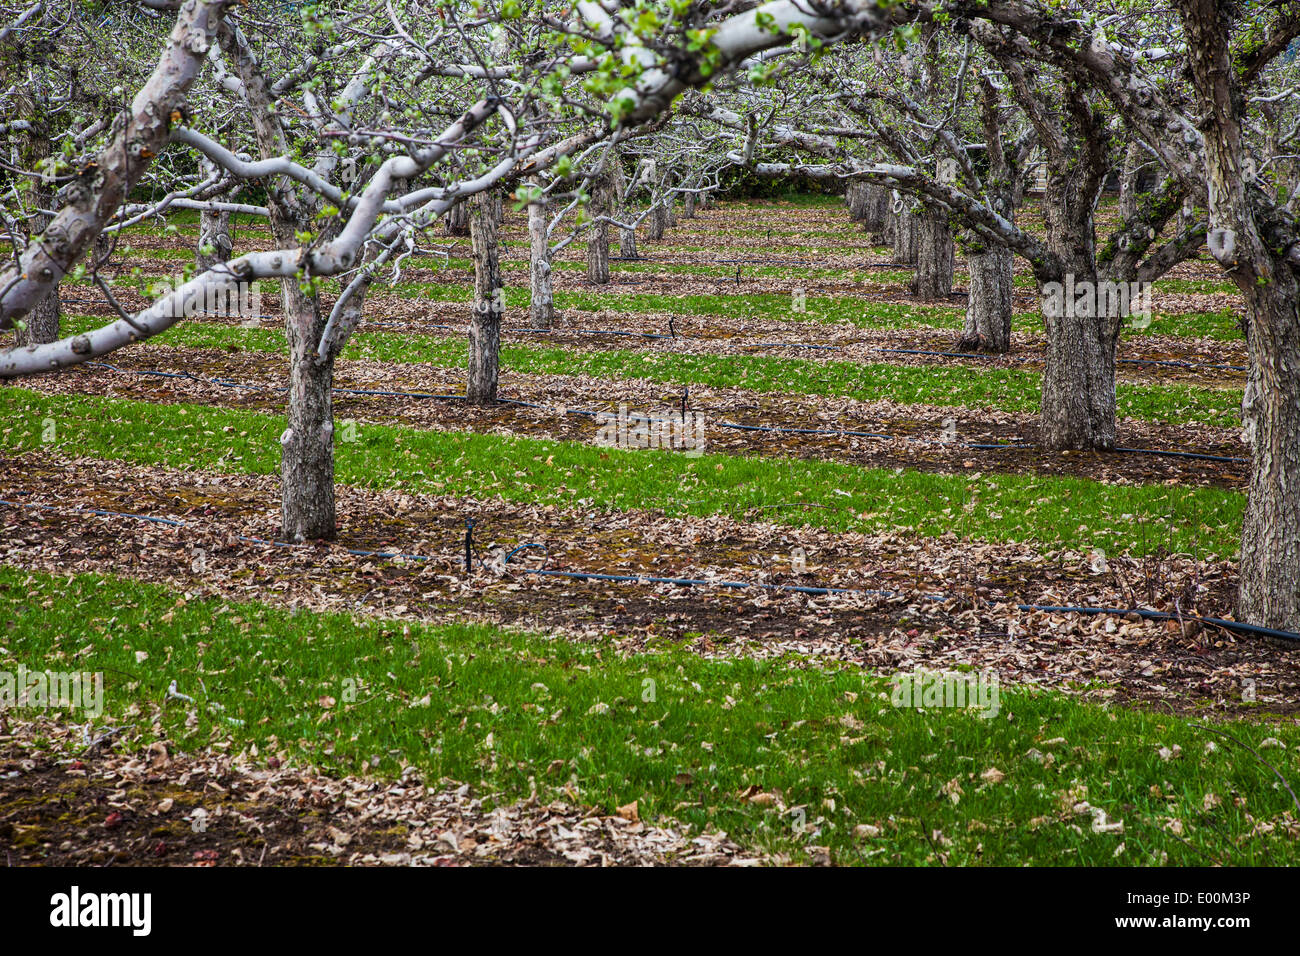 View under the boughs of fruit trees in an Okanagan Valley orchard, Kelowna. Stock Photo